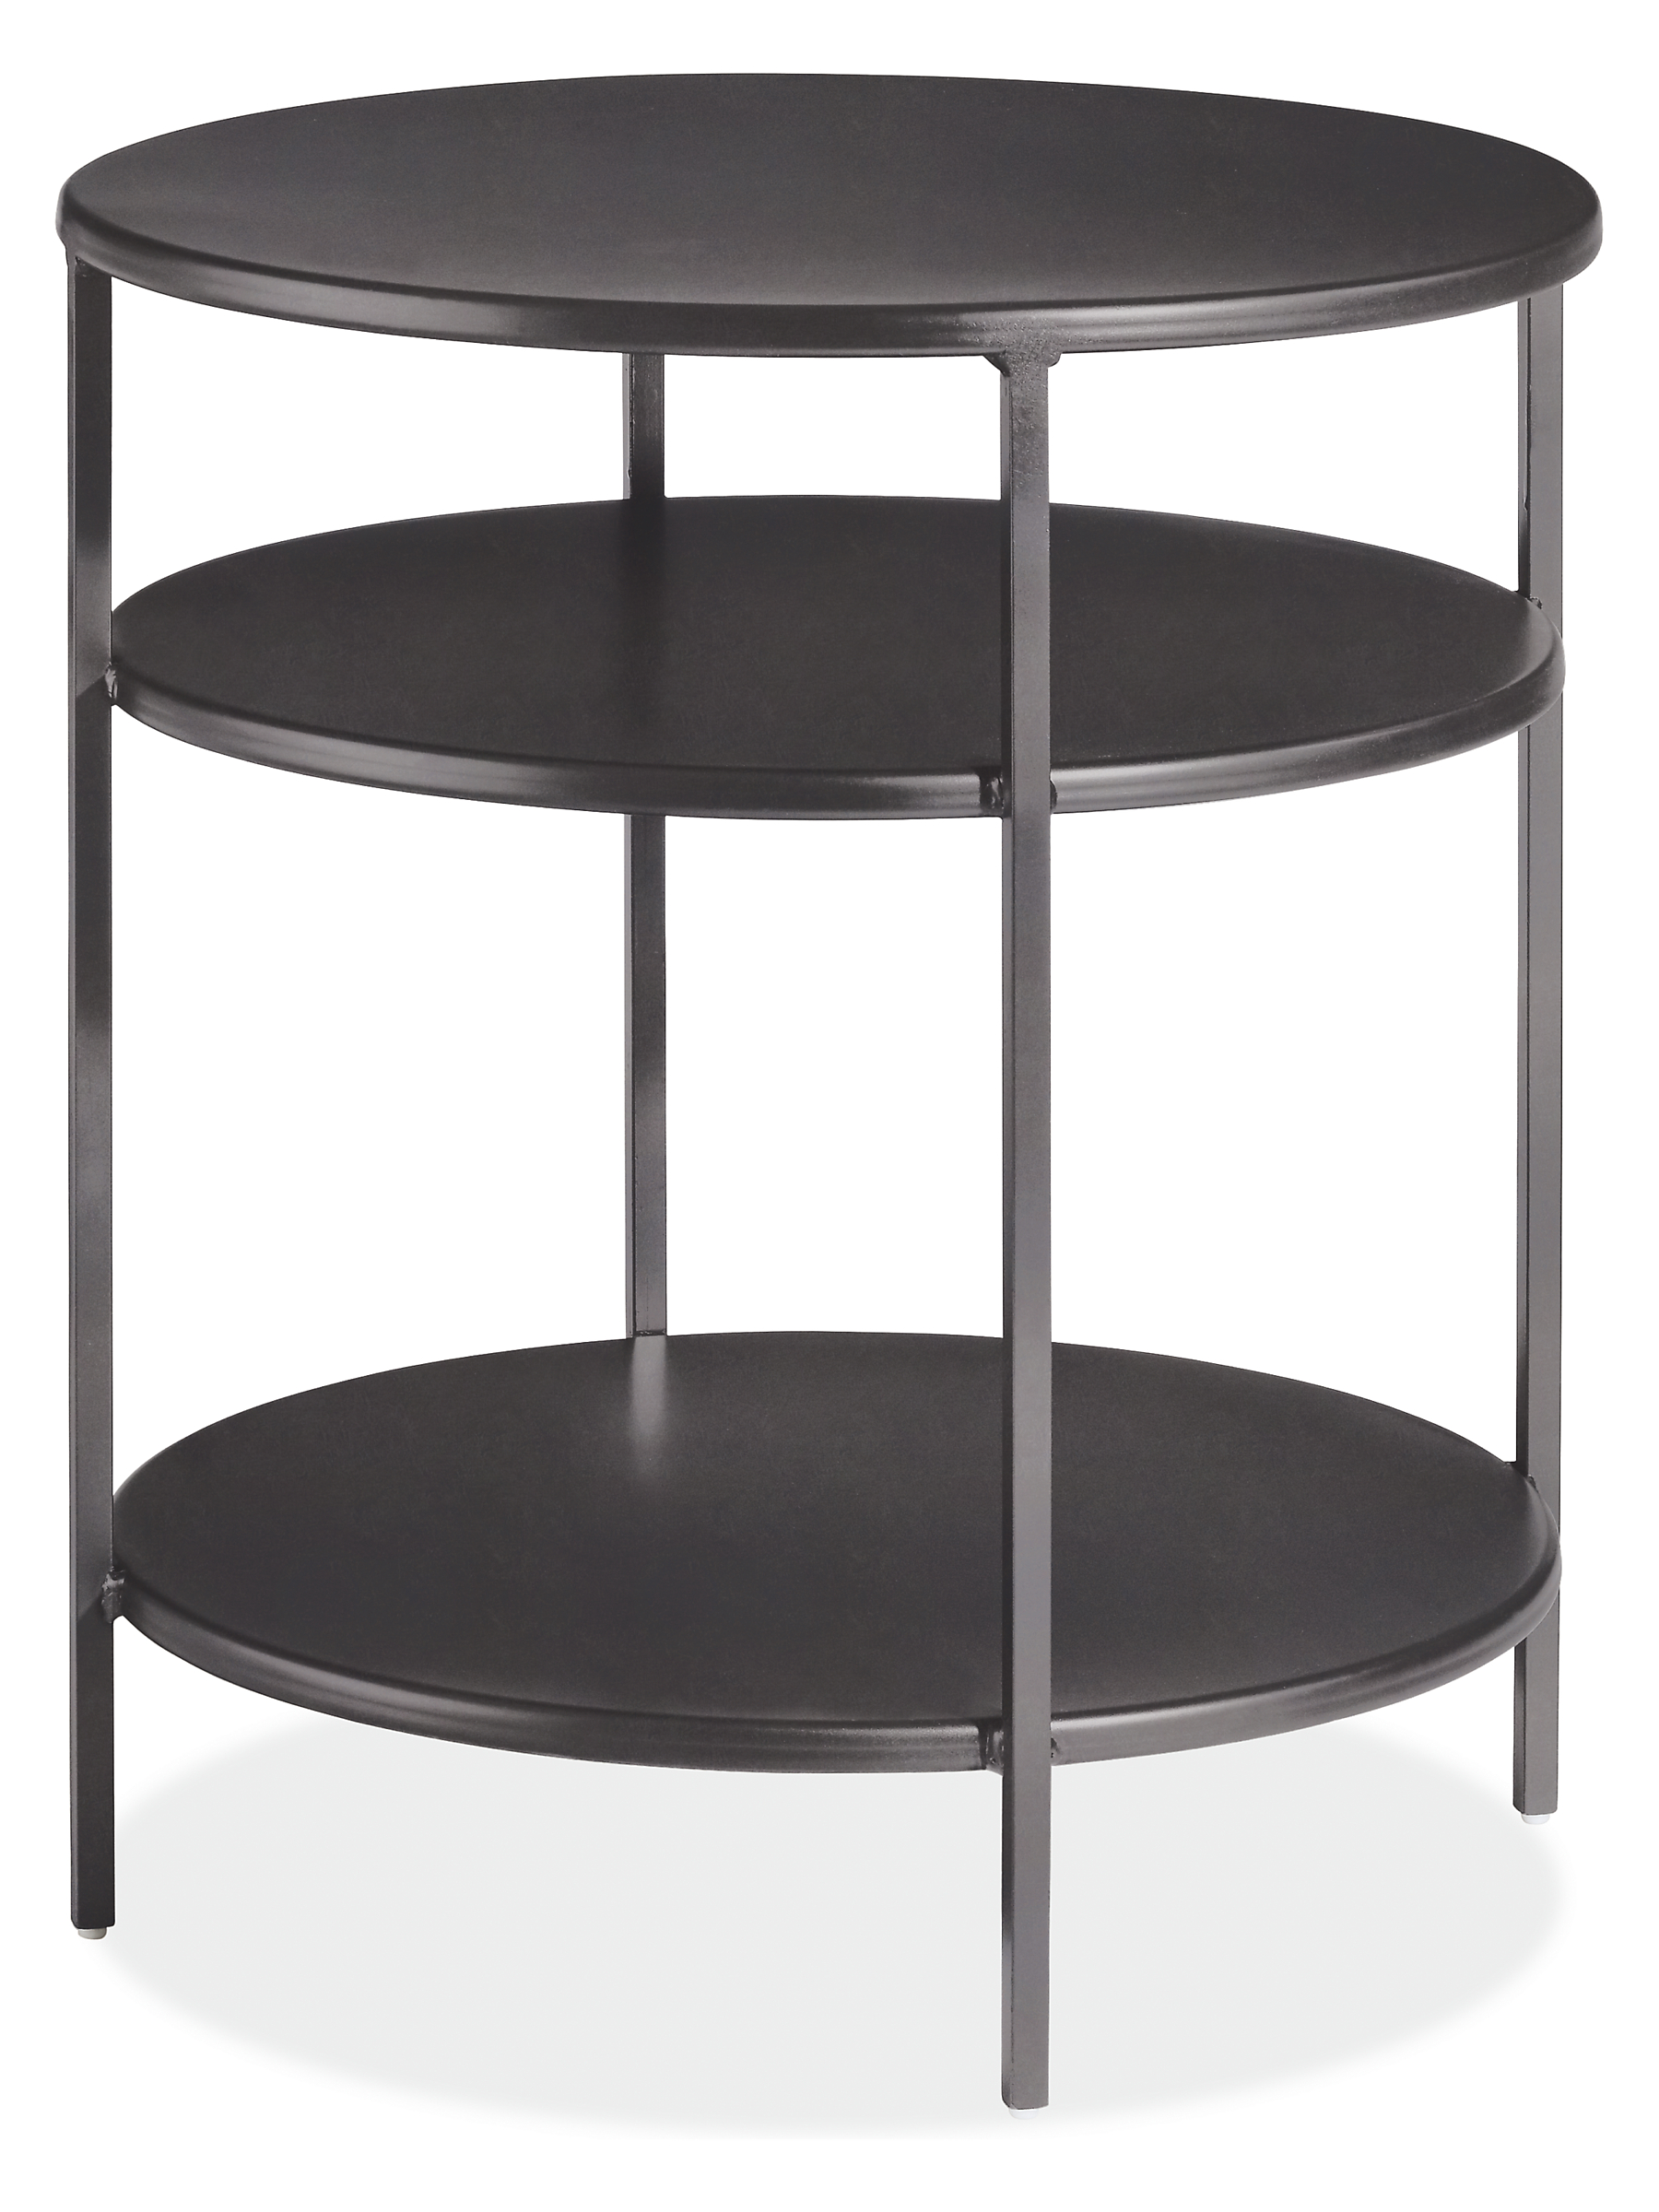 Slim 20 diam 22h Round End Table with Shelves